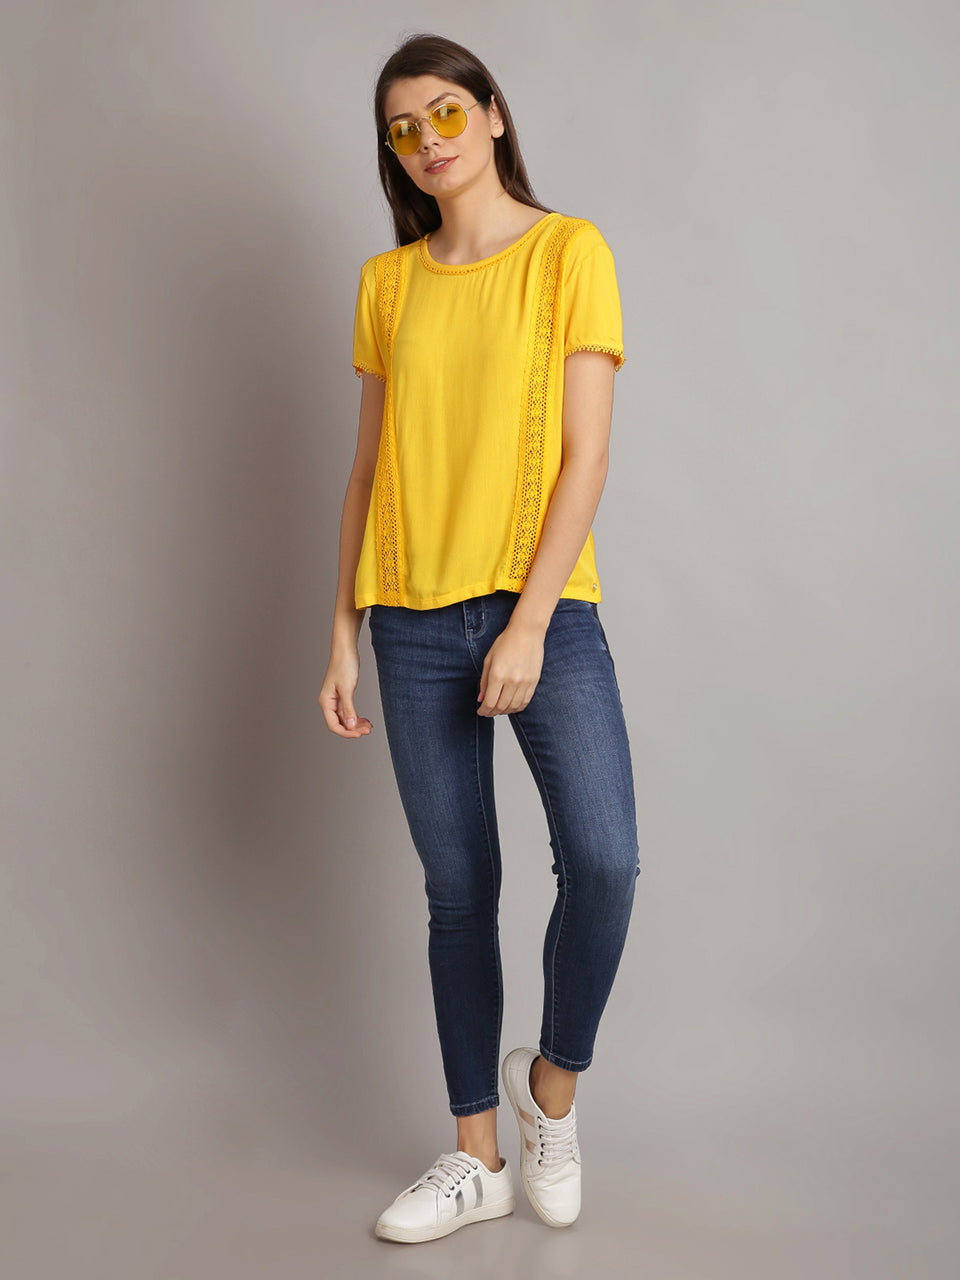 women solid yellow half sleeve lace tops